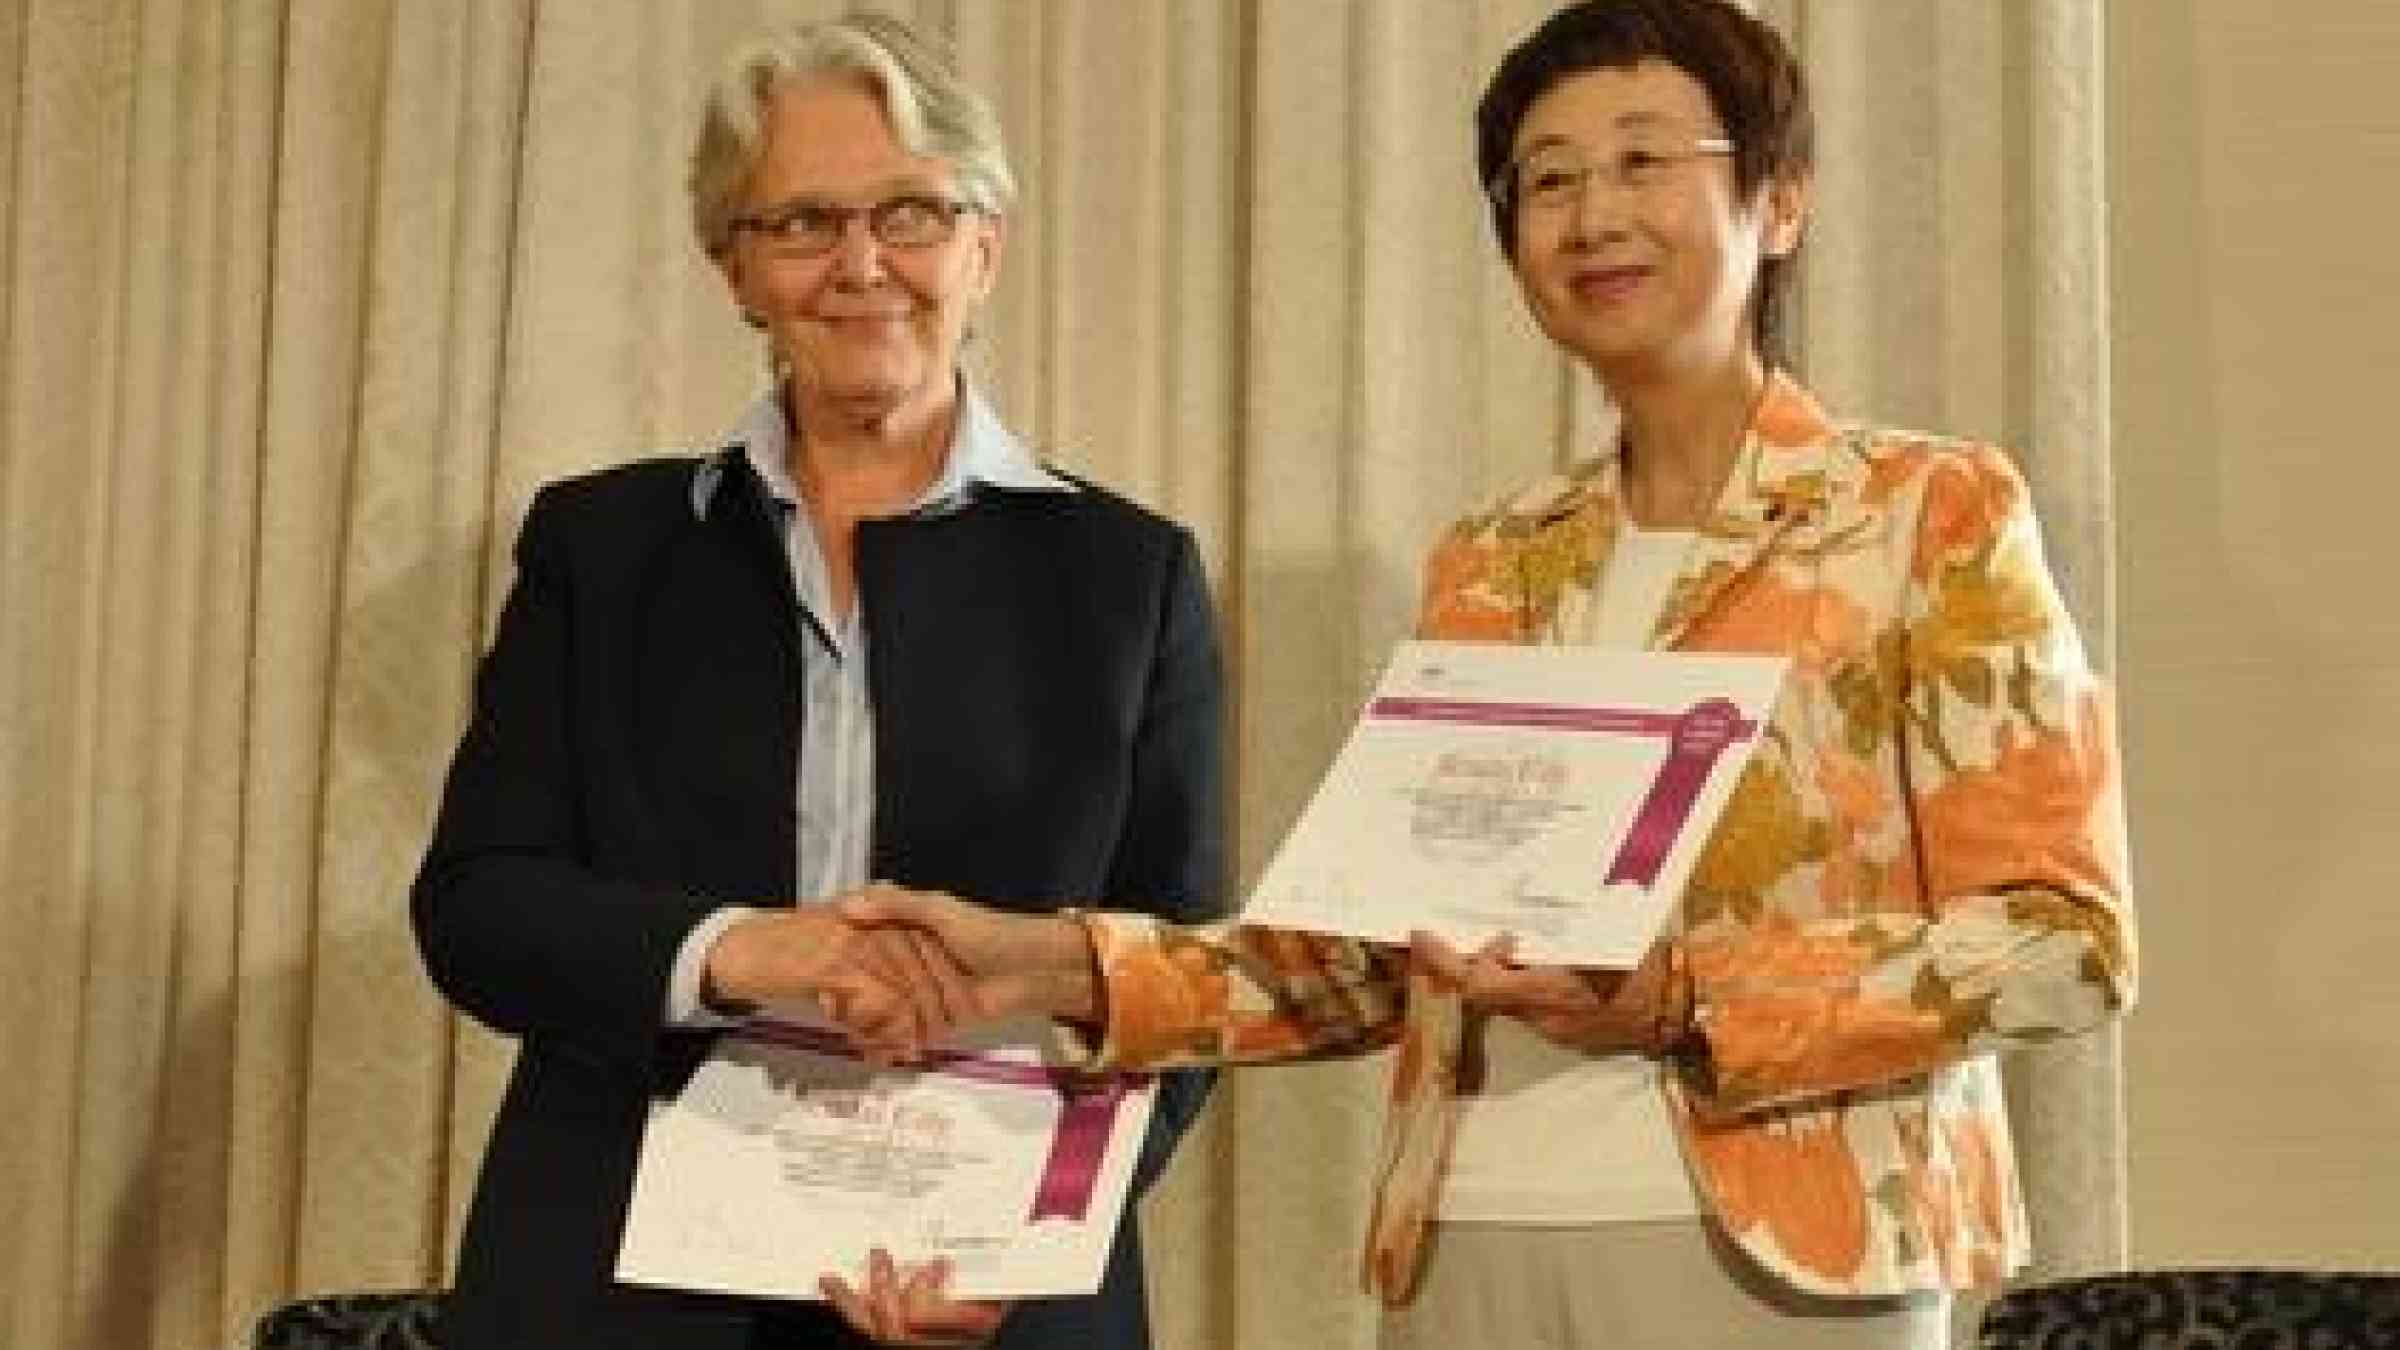 From left: UNISDR Chief Margareta Wahlström presents the Mayor of Sendai, Emiko Okuyama, with a certificate of recognition on the importance of political leadership in building disaster resilient socieites.